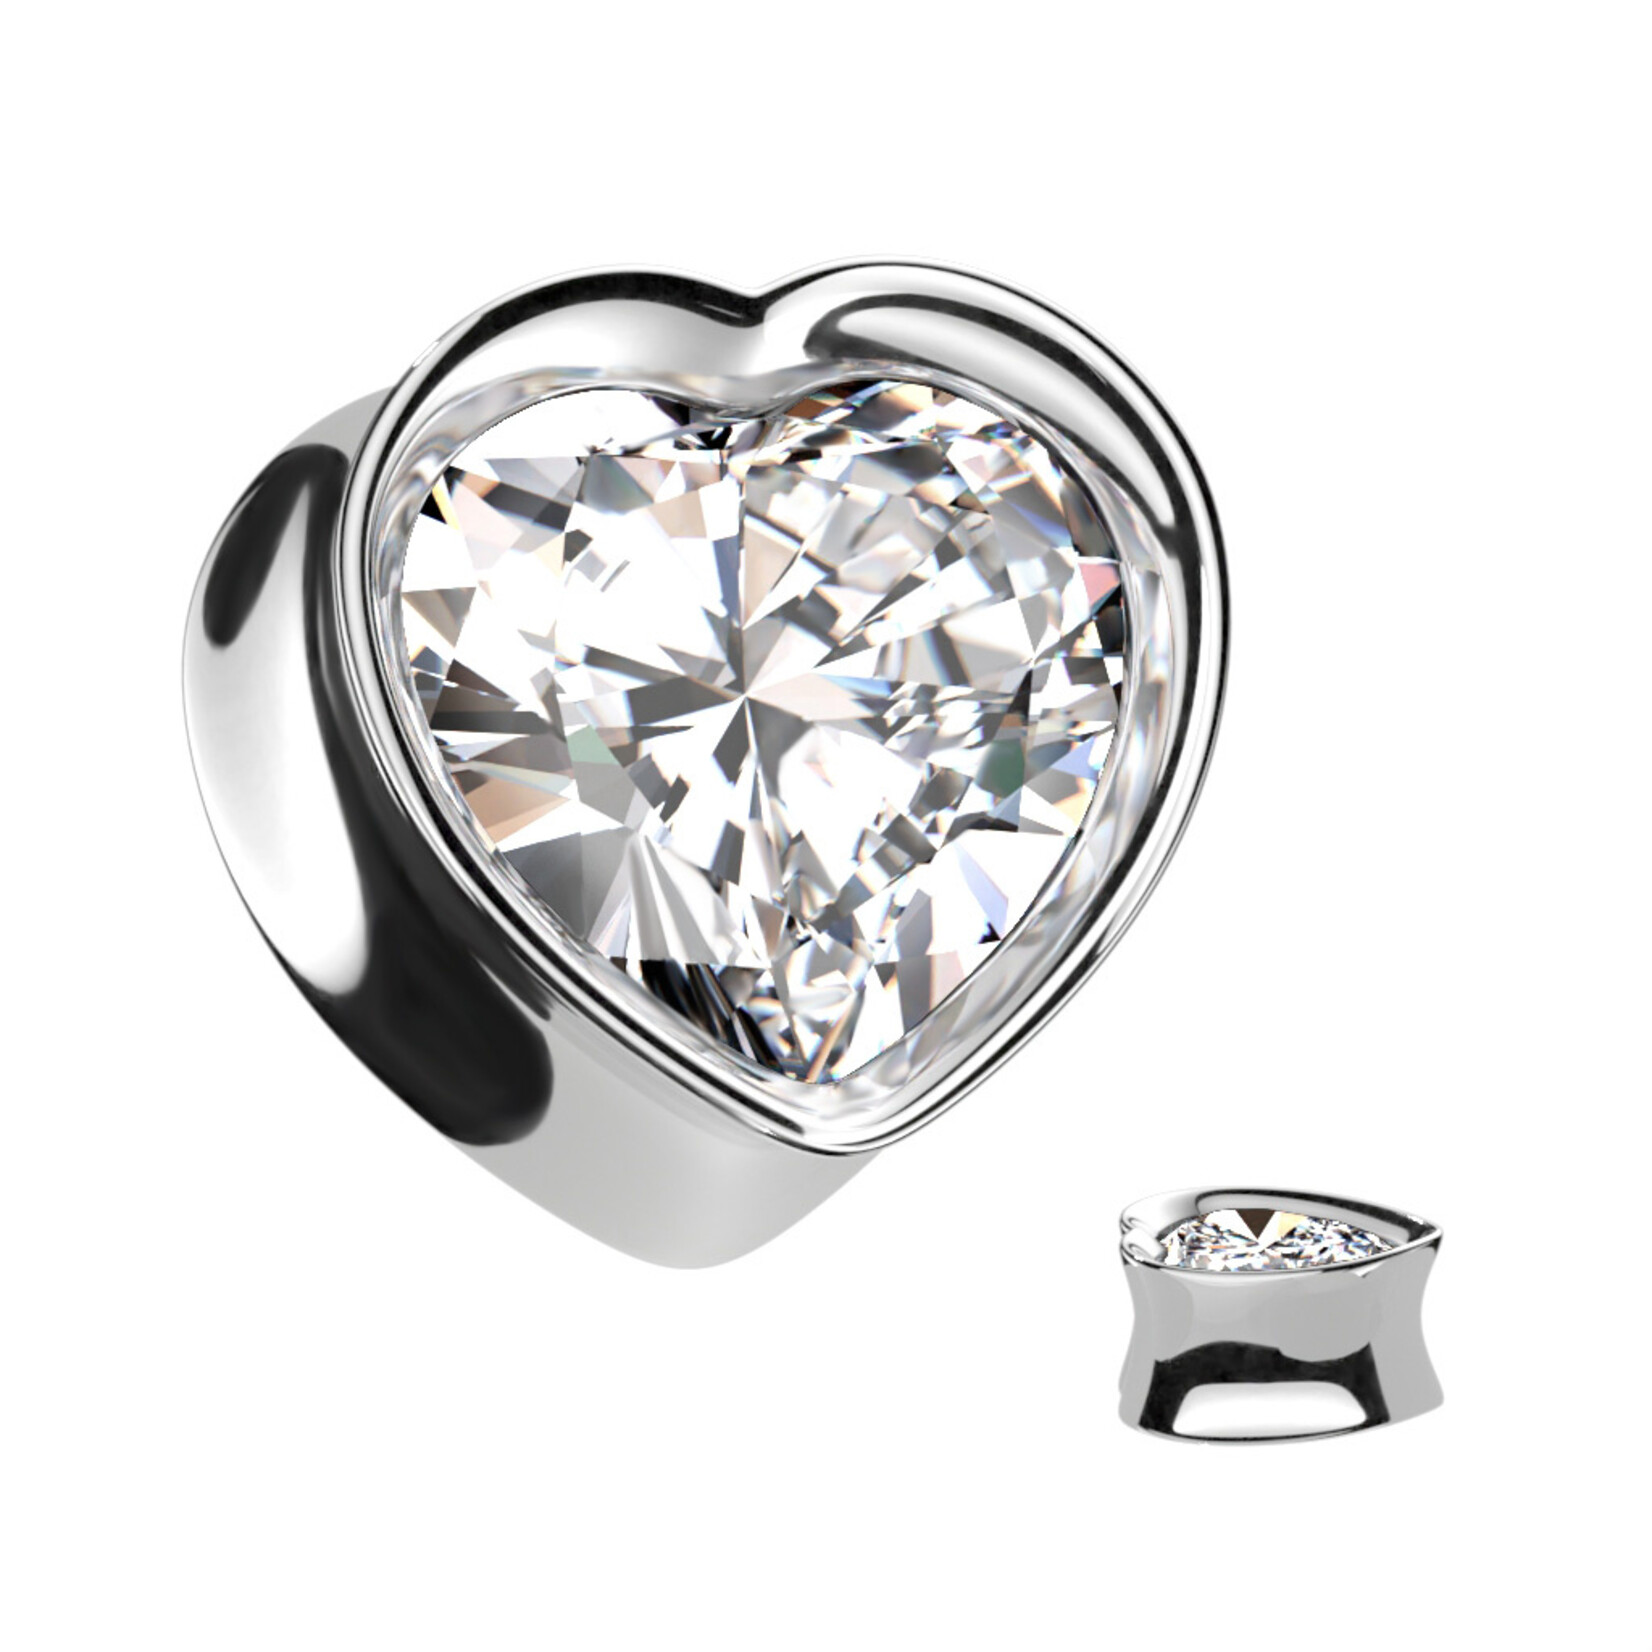 Hollywood Body Jewelry Double Flared Gem Heart Tunnel Plug Pair